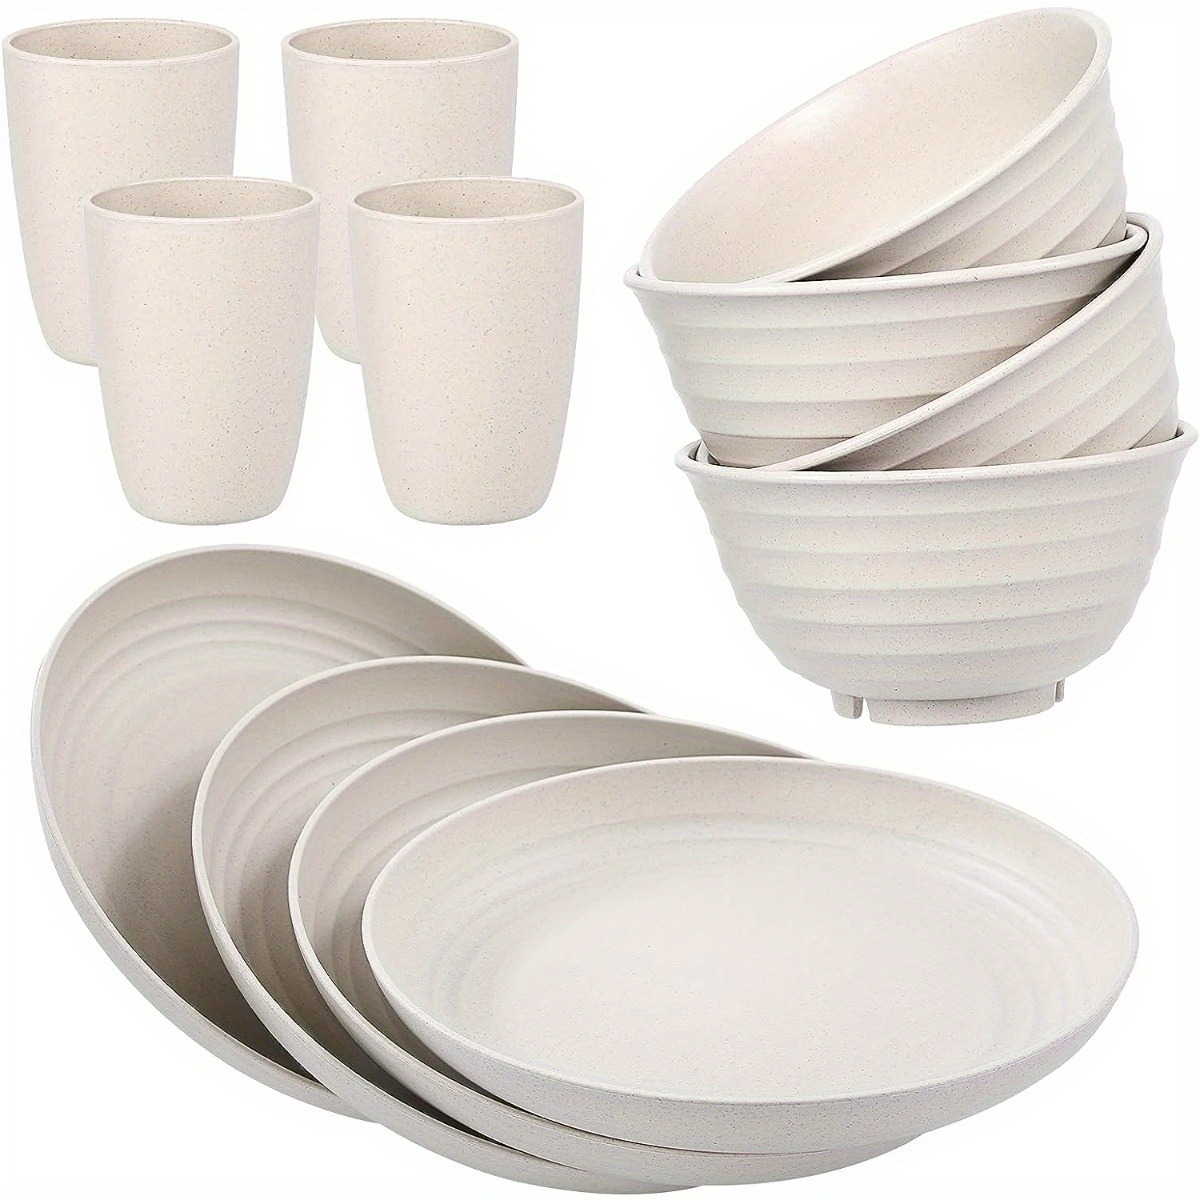 12pcs unbreakable wheat straw dinnerware sets lightweight colourful plates and bowls sets for 4 microwave dishwasher safe college dorm room essentials kitchen supplies